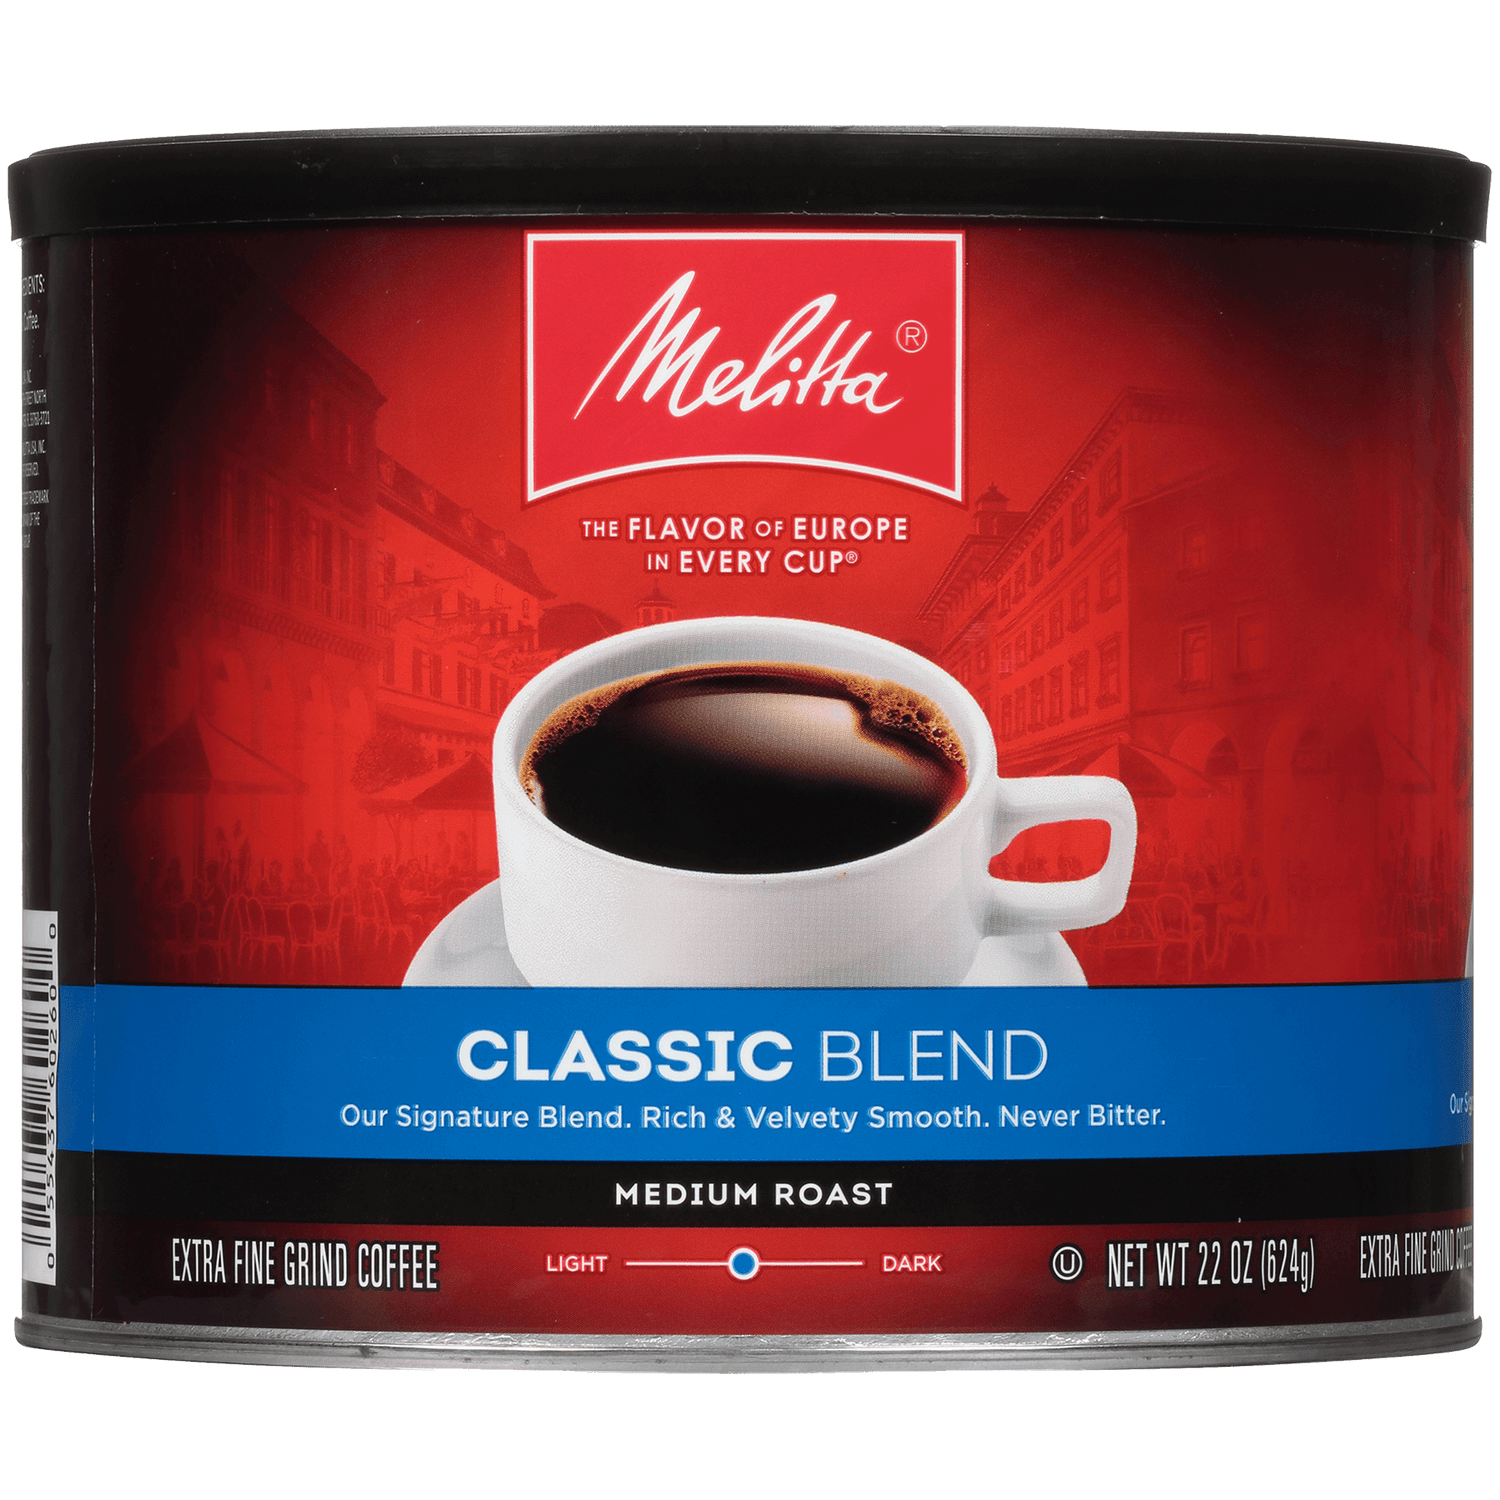 Melitta USA: Melitta® - Shop Better Coffee, Filters, Pour-Overs & More